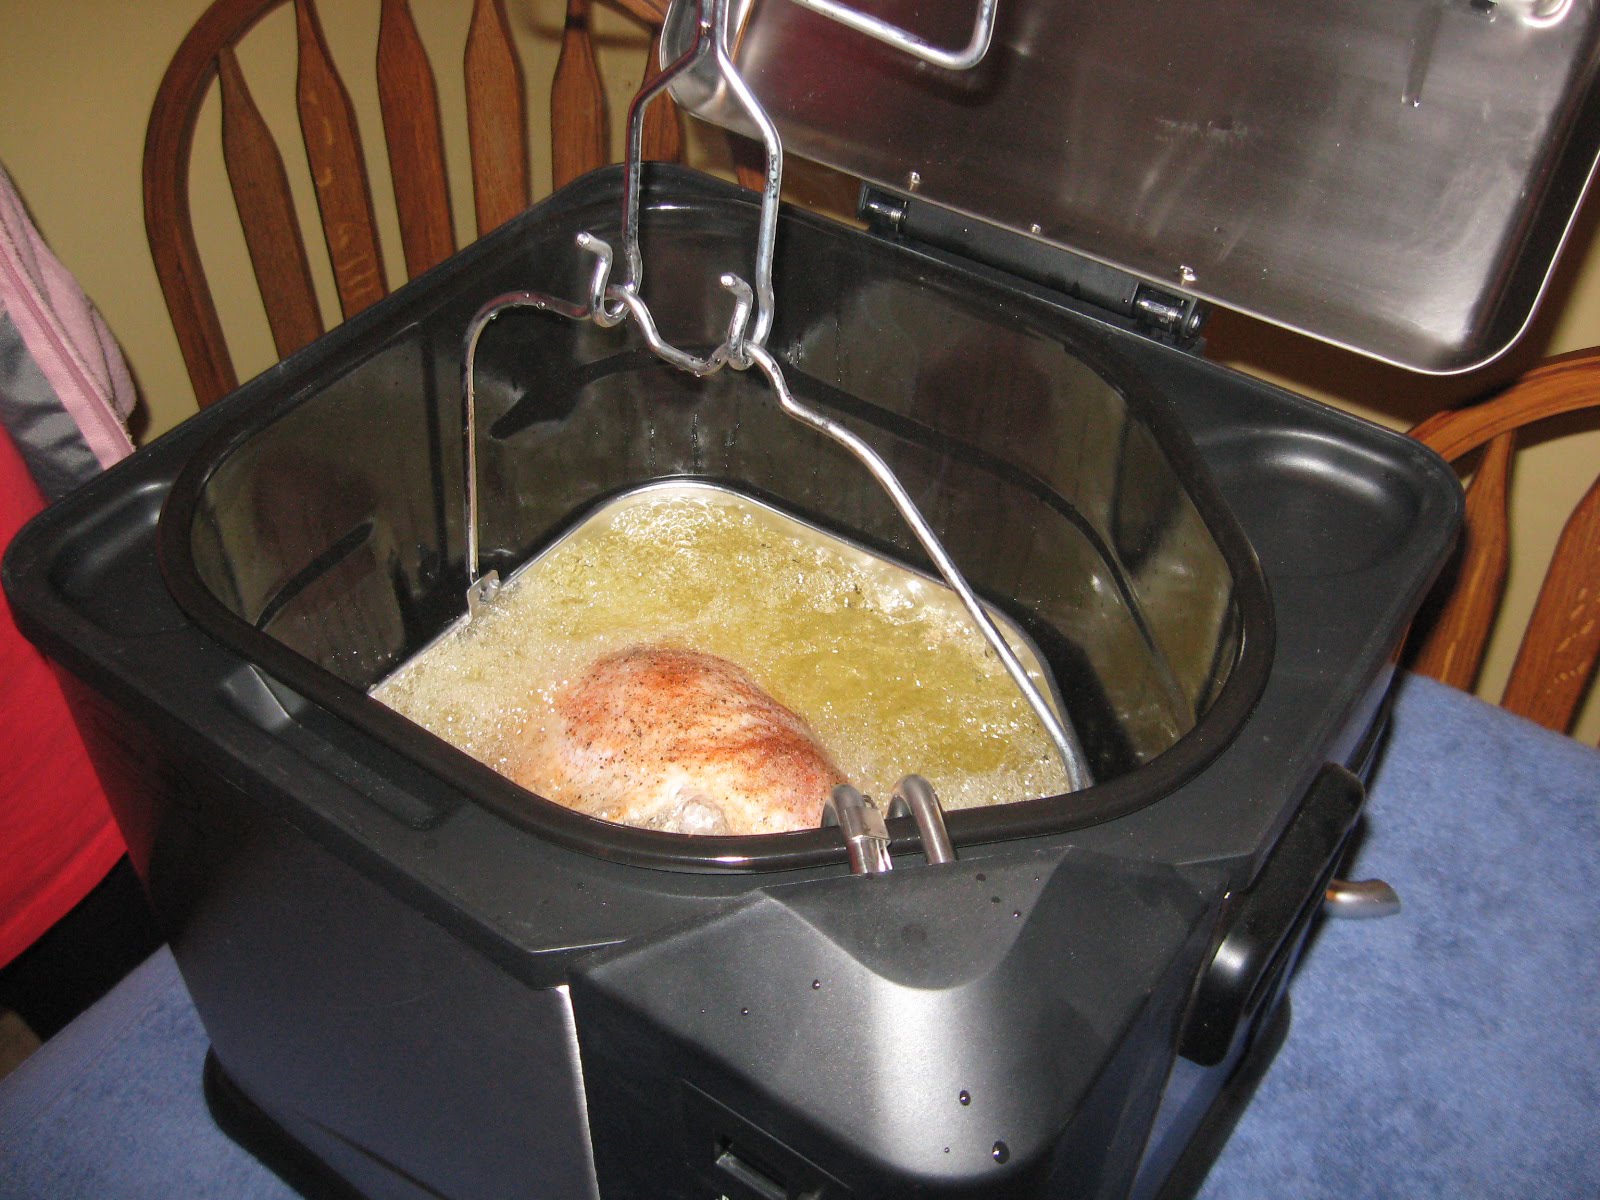 Easy and safe way to fry your turkey Using my masterbuilt (electric), electric turkey fryer